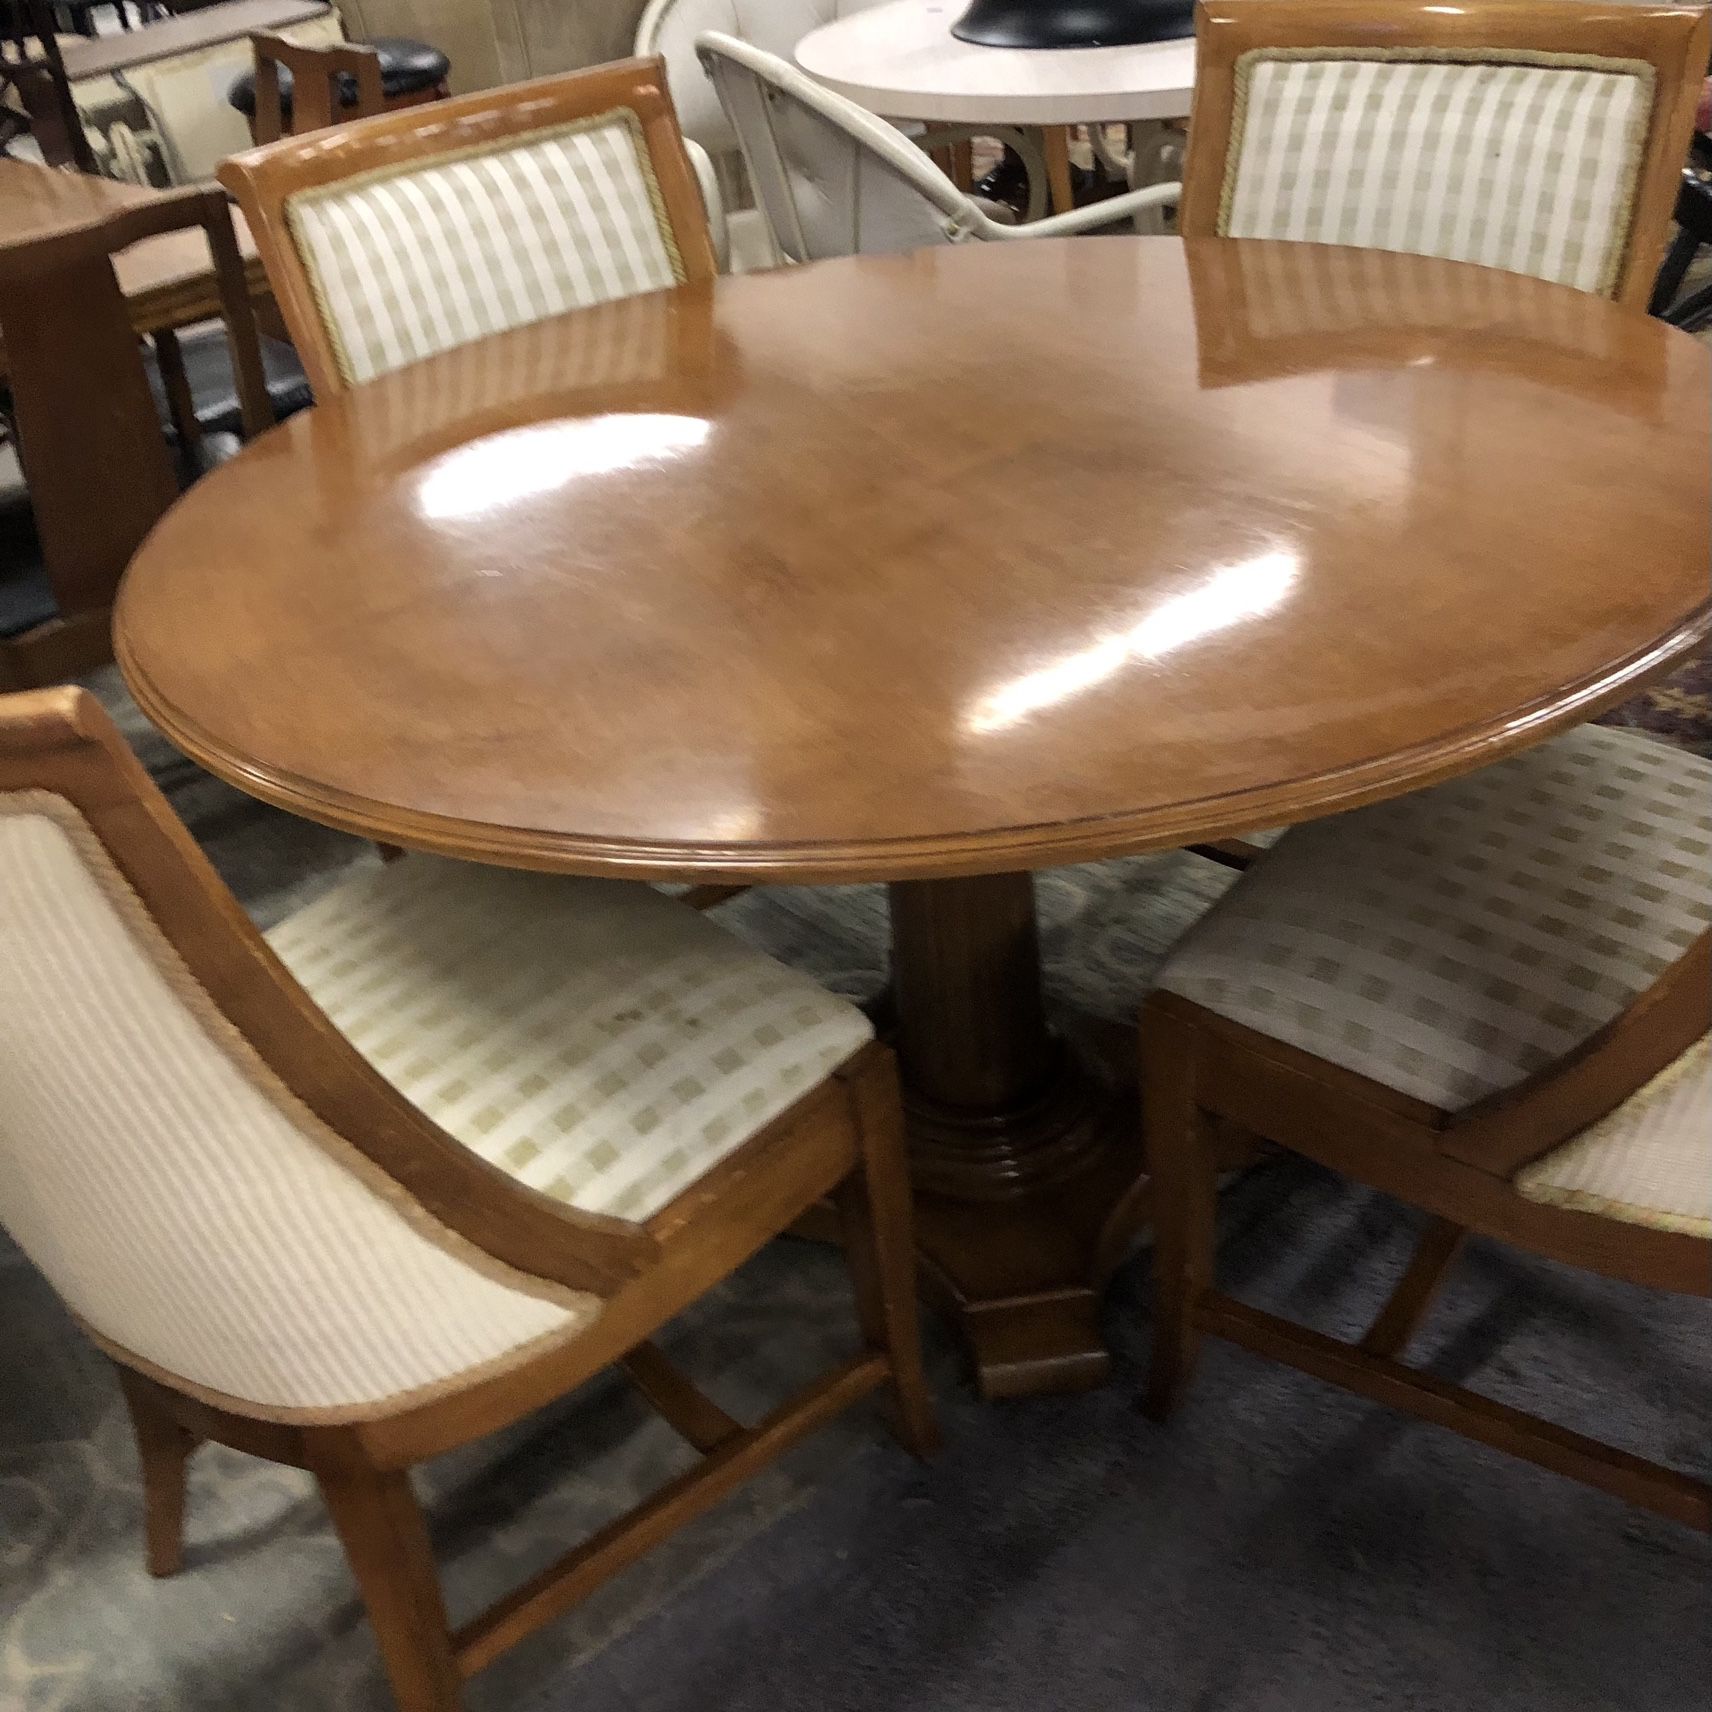 Wood Round Dining Table With 4 Chairs 